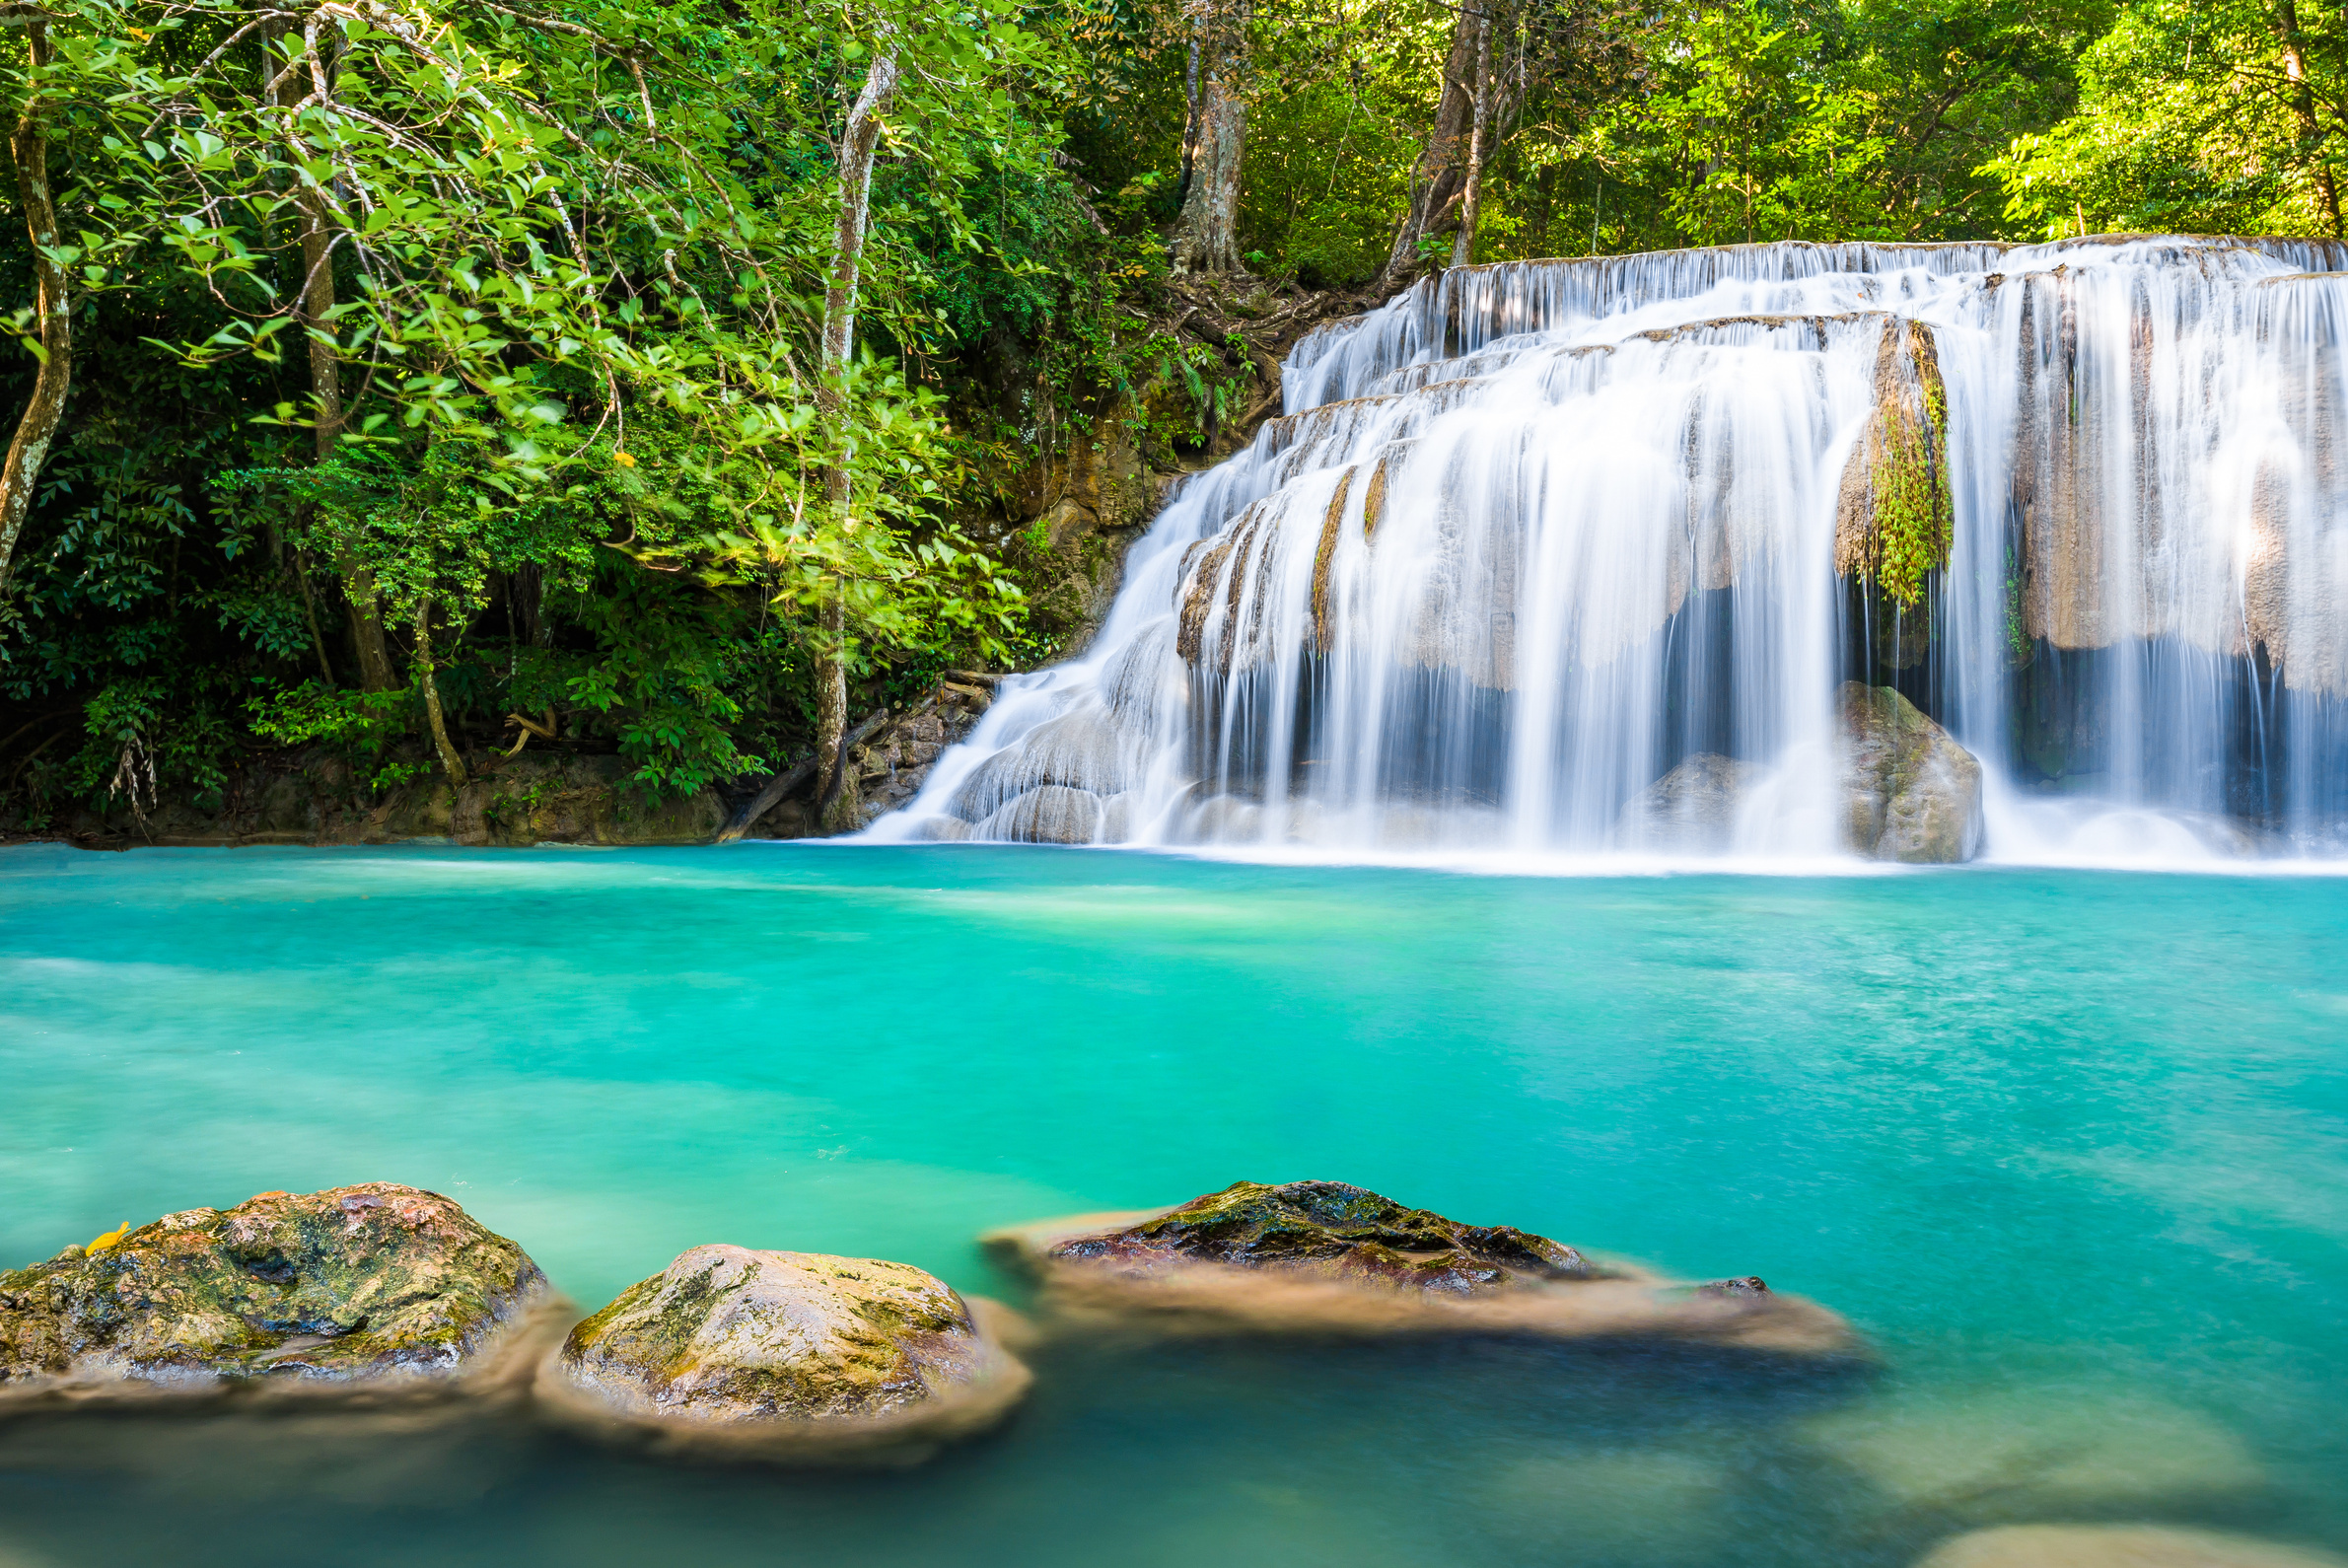 Waterfall and blue emerald water color in Erawan national park.